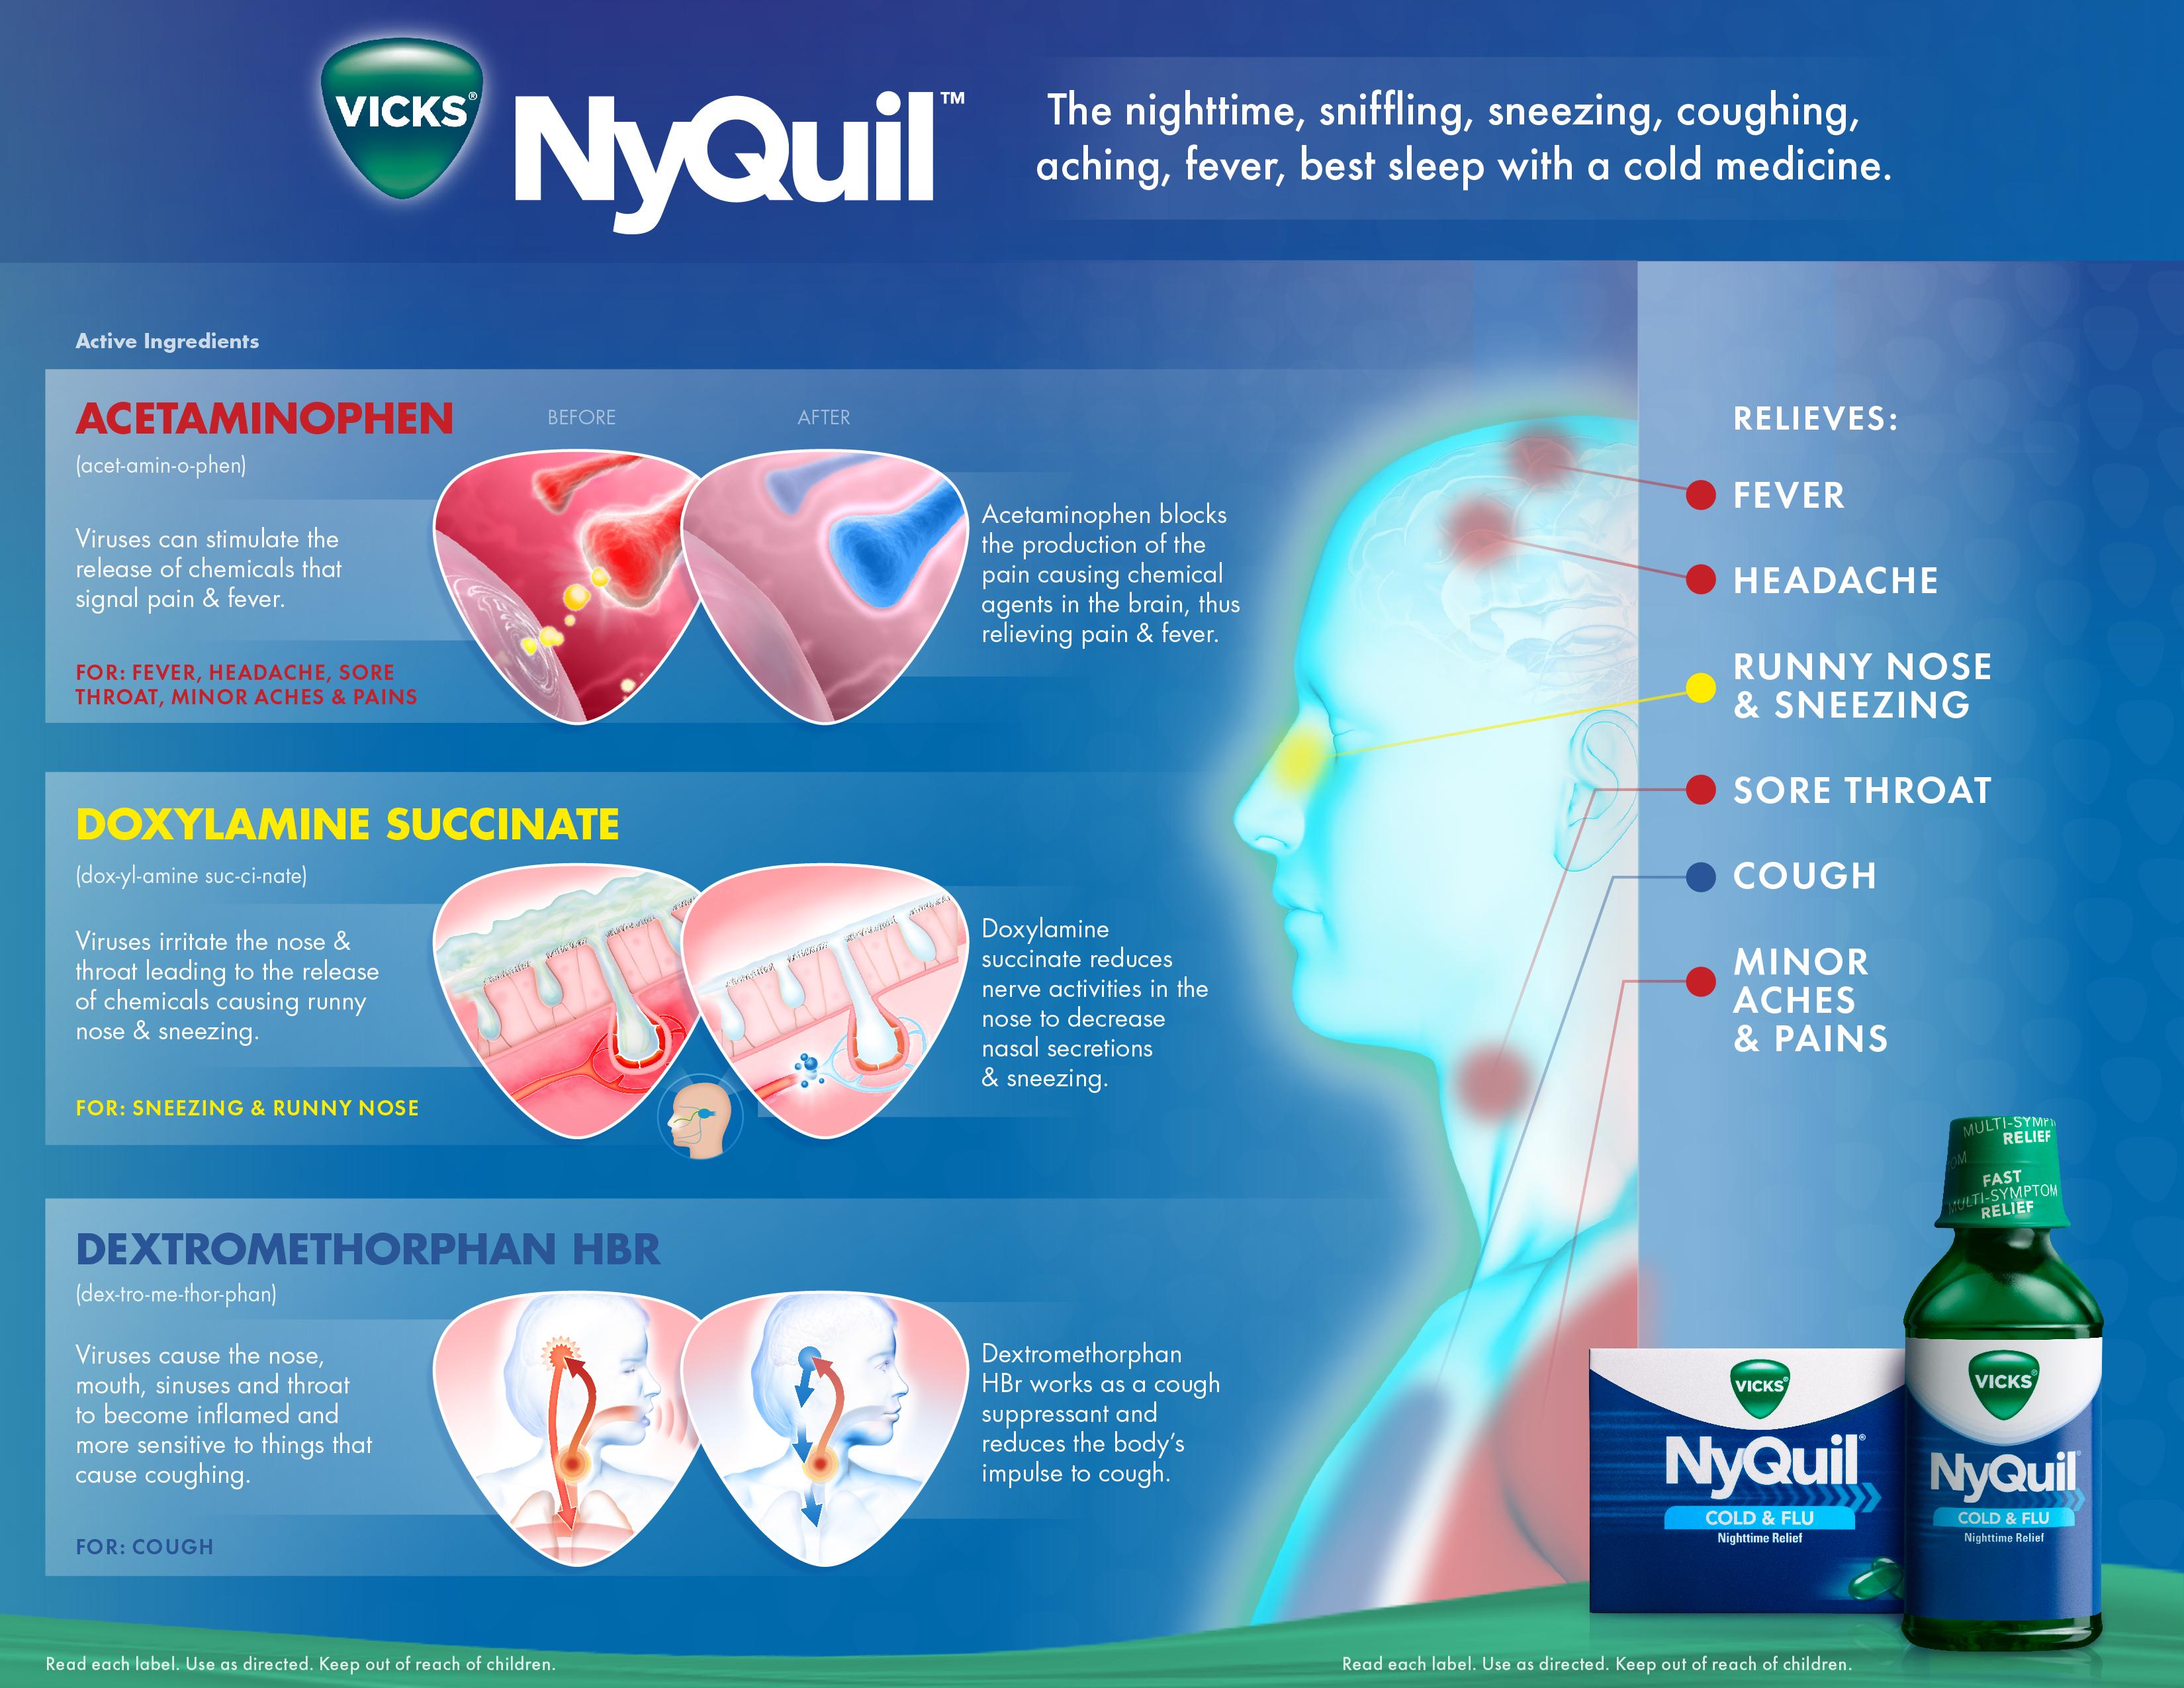 Amazon.com: Vicks NyQuil Cold & Flu Nighttime Relief ...